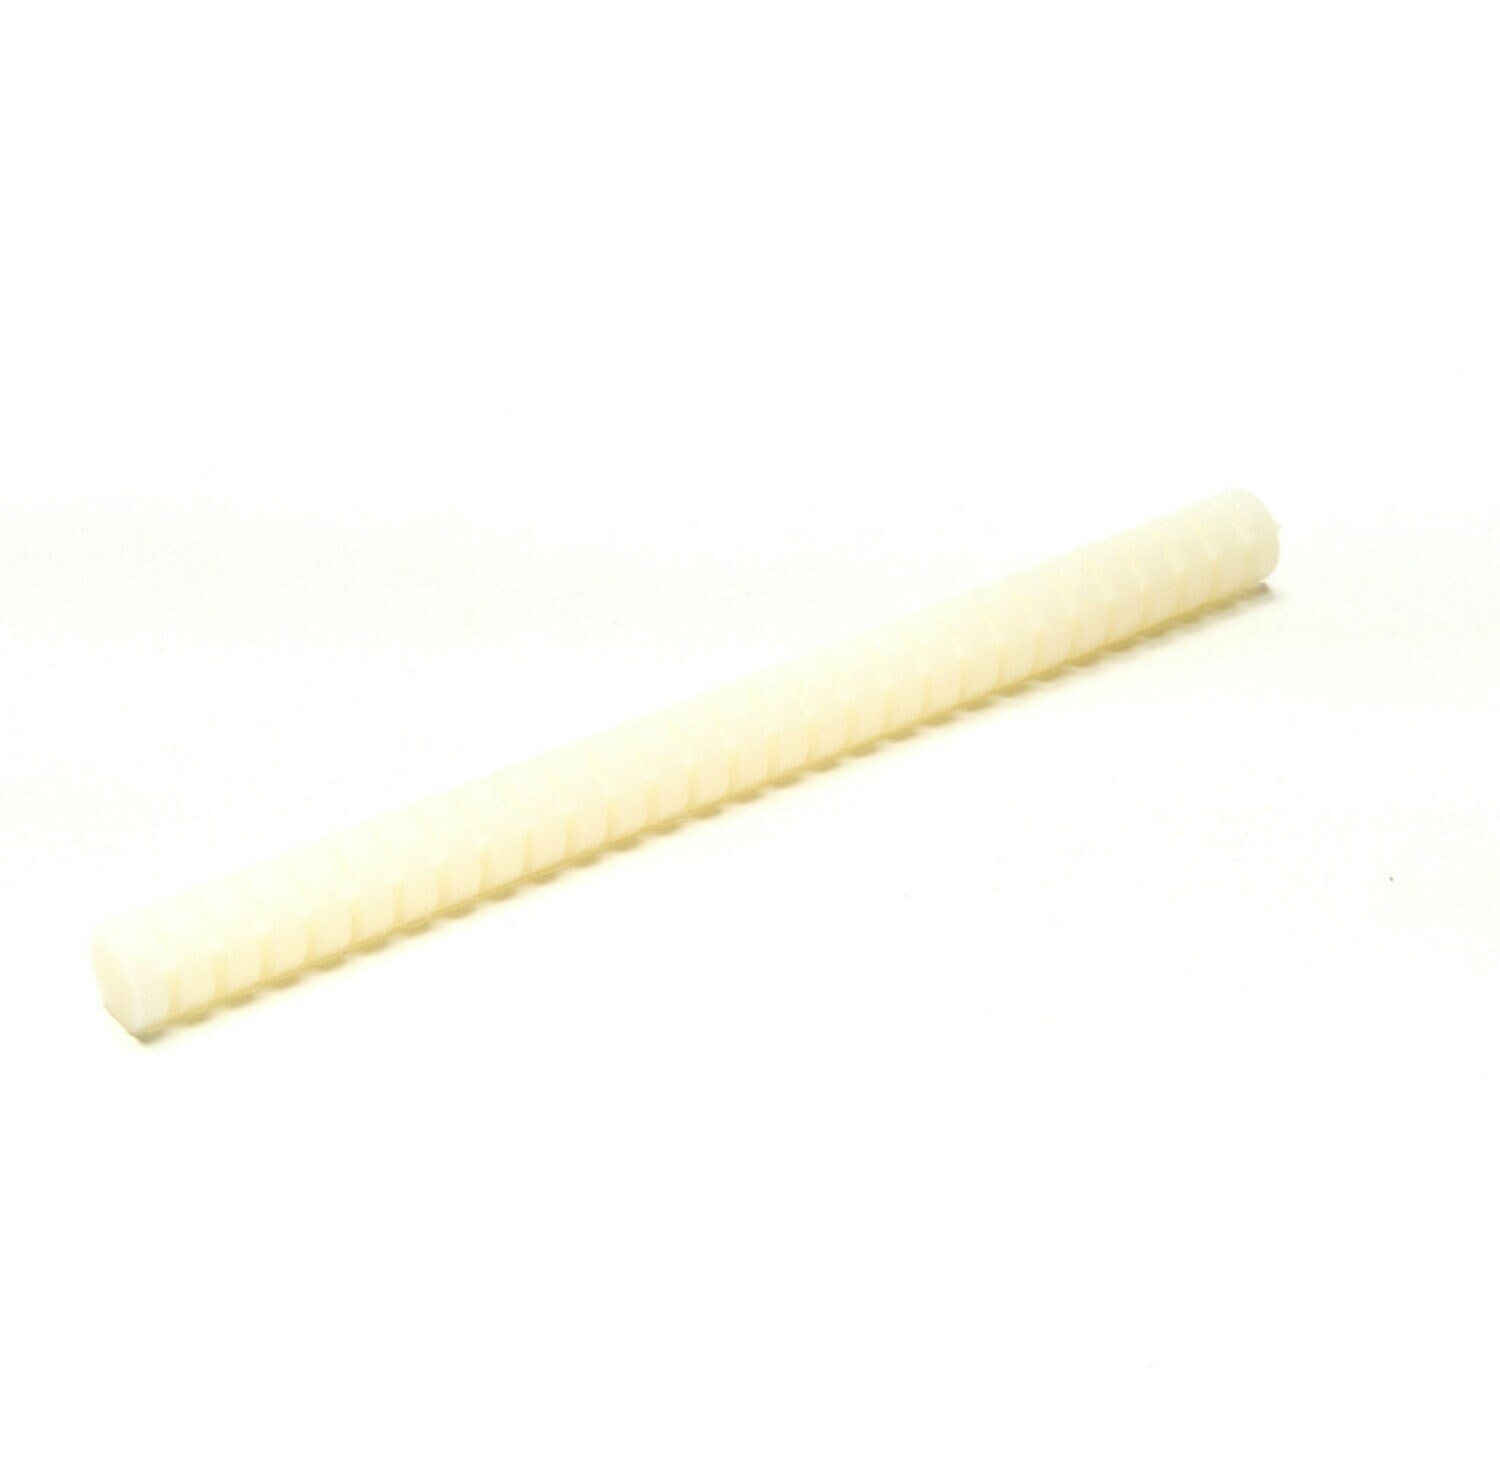 7000000878 - 3M Hot Melt Adhesive 3748Q, Off-White, 5/8 in x 8 in, 11 lb, Case